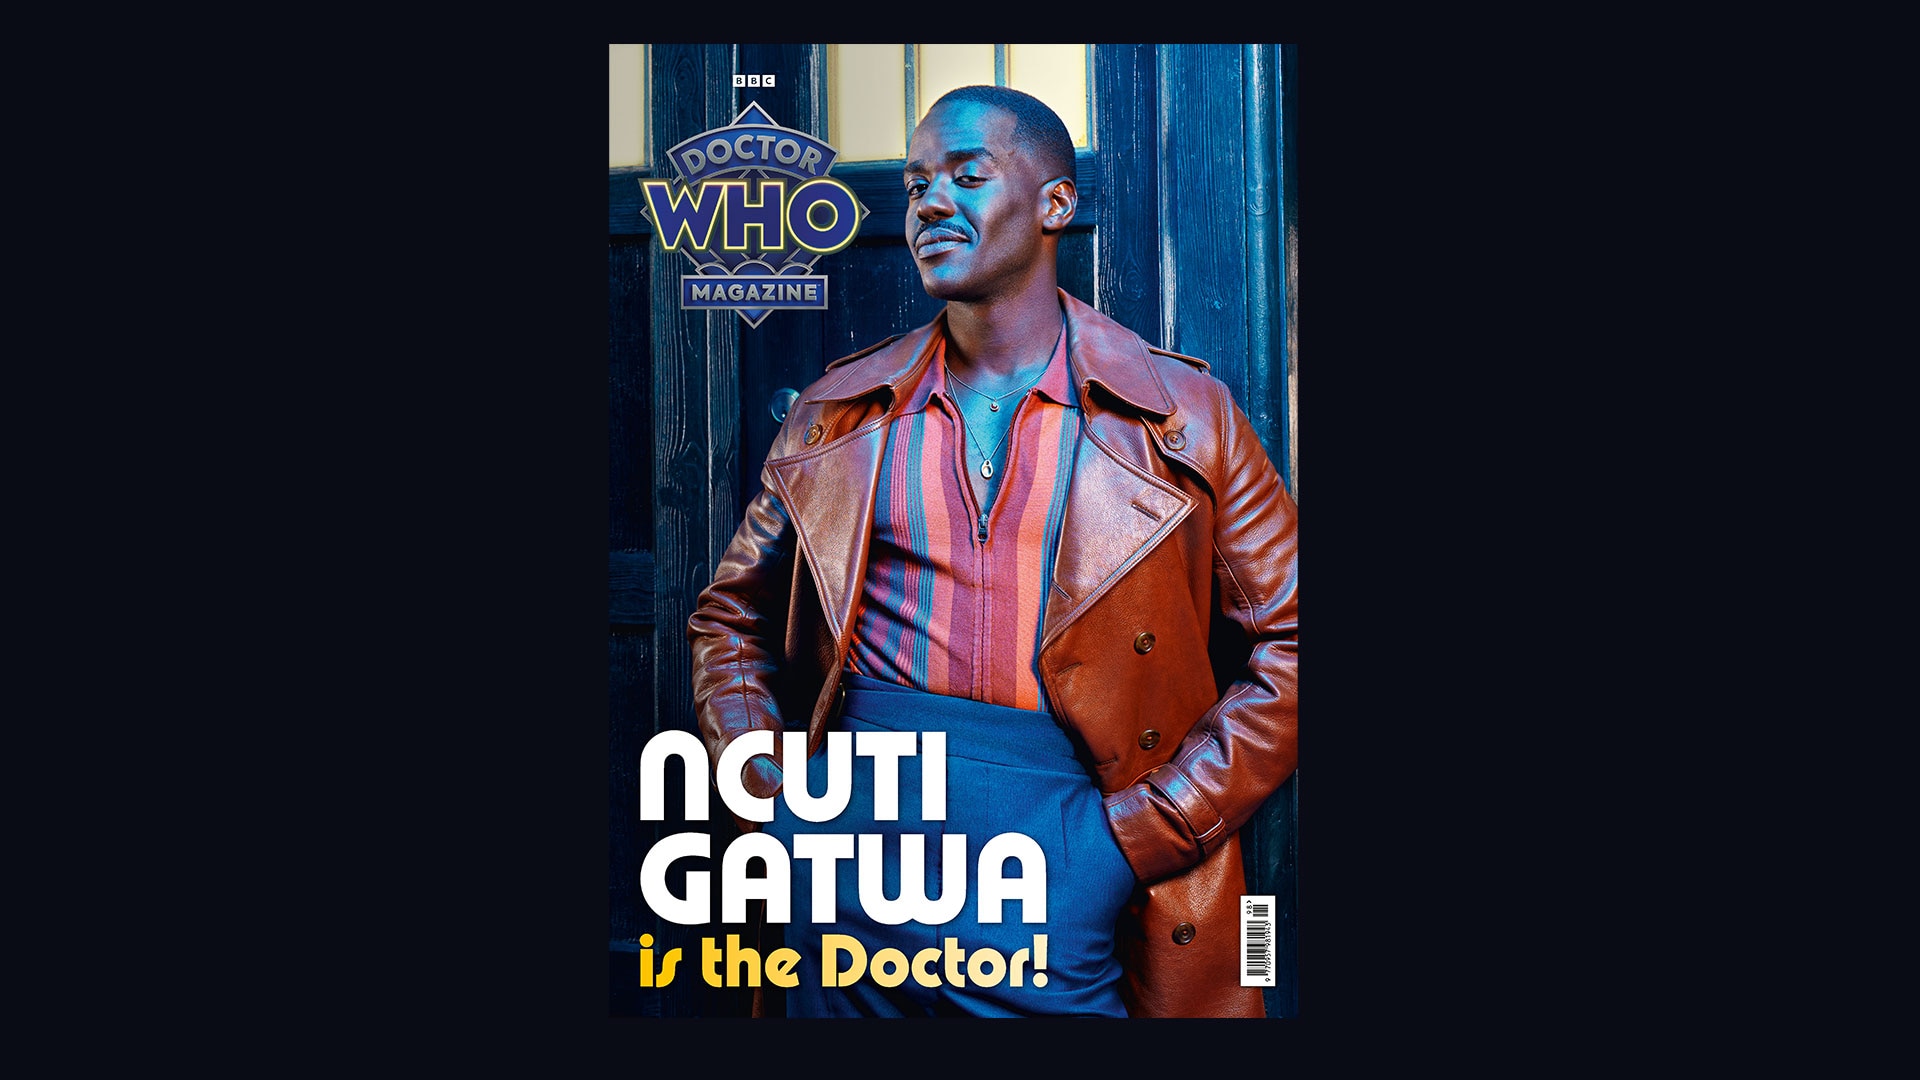 Doctor Who Magazine issue 598